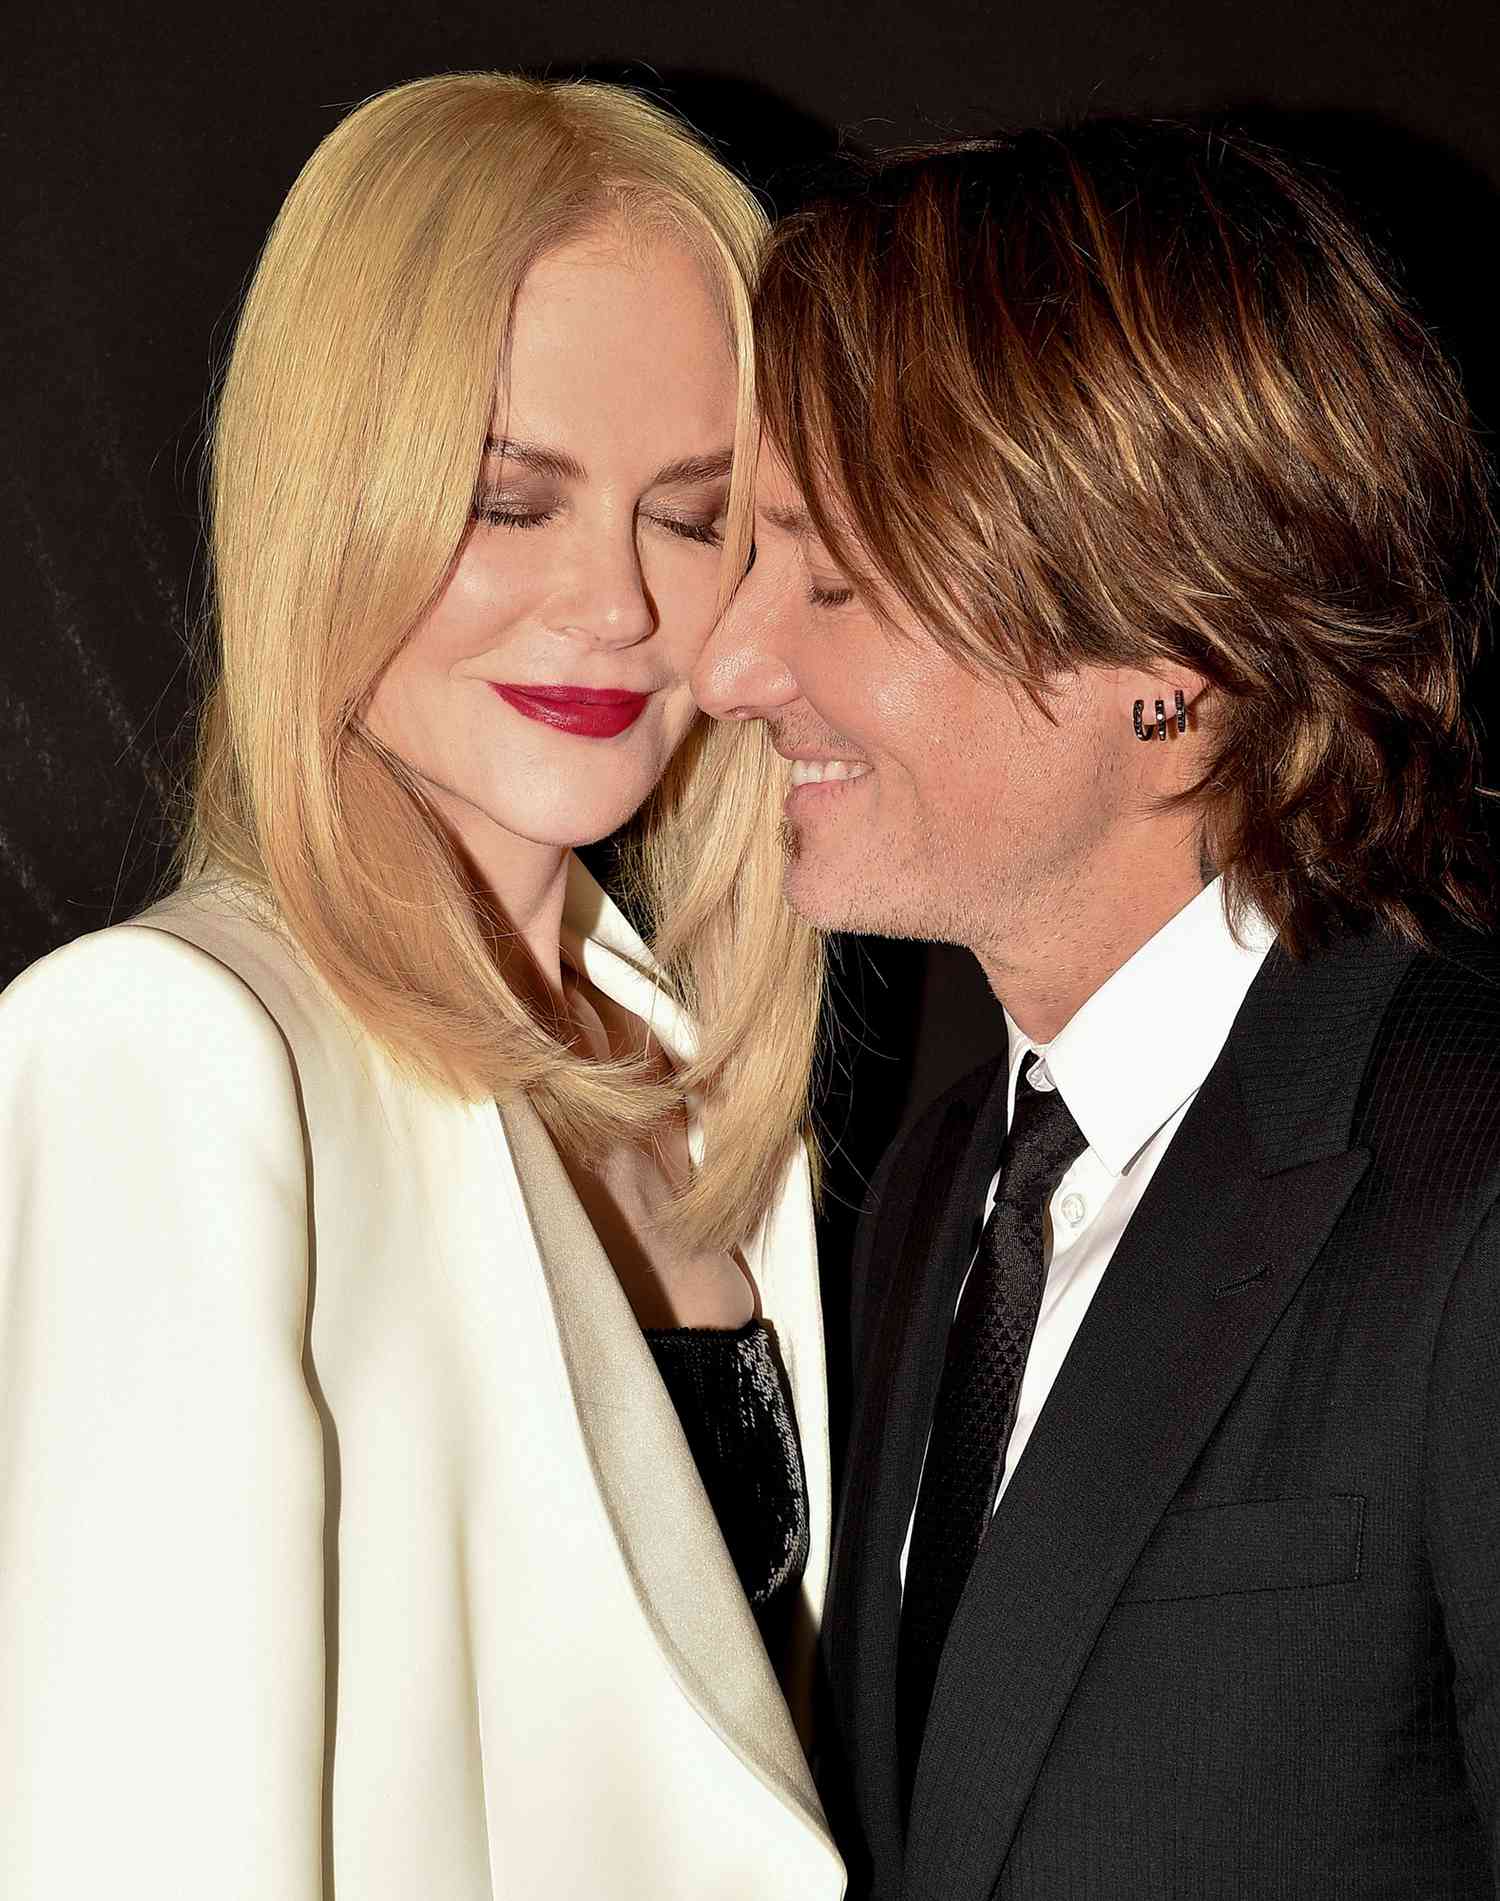 Nicole Kidman and husband Keith Urban pose backstage after the Giorgio Armani Prive Haute Couture Fall/Winter 2019 2020 show as part of Paris Fashion Week on July 02, 2019 in Paris, France